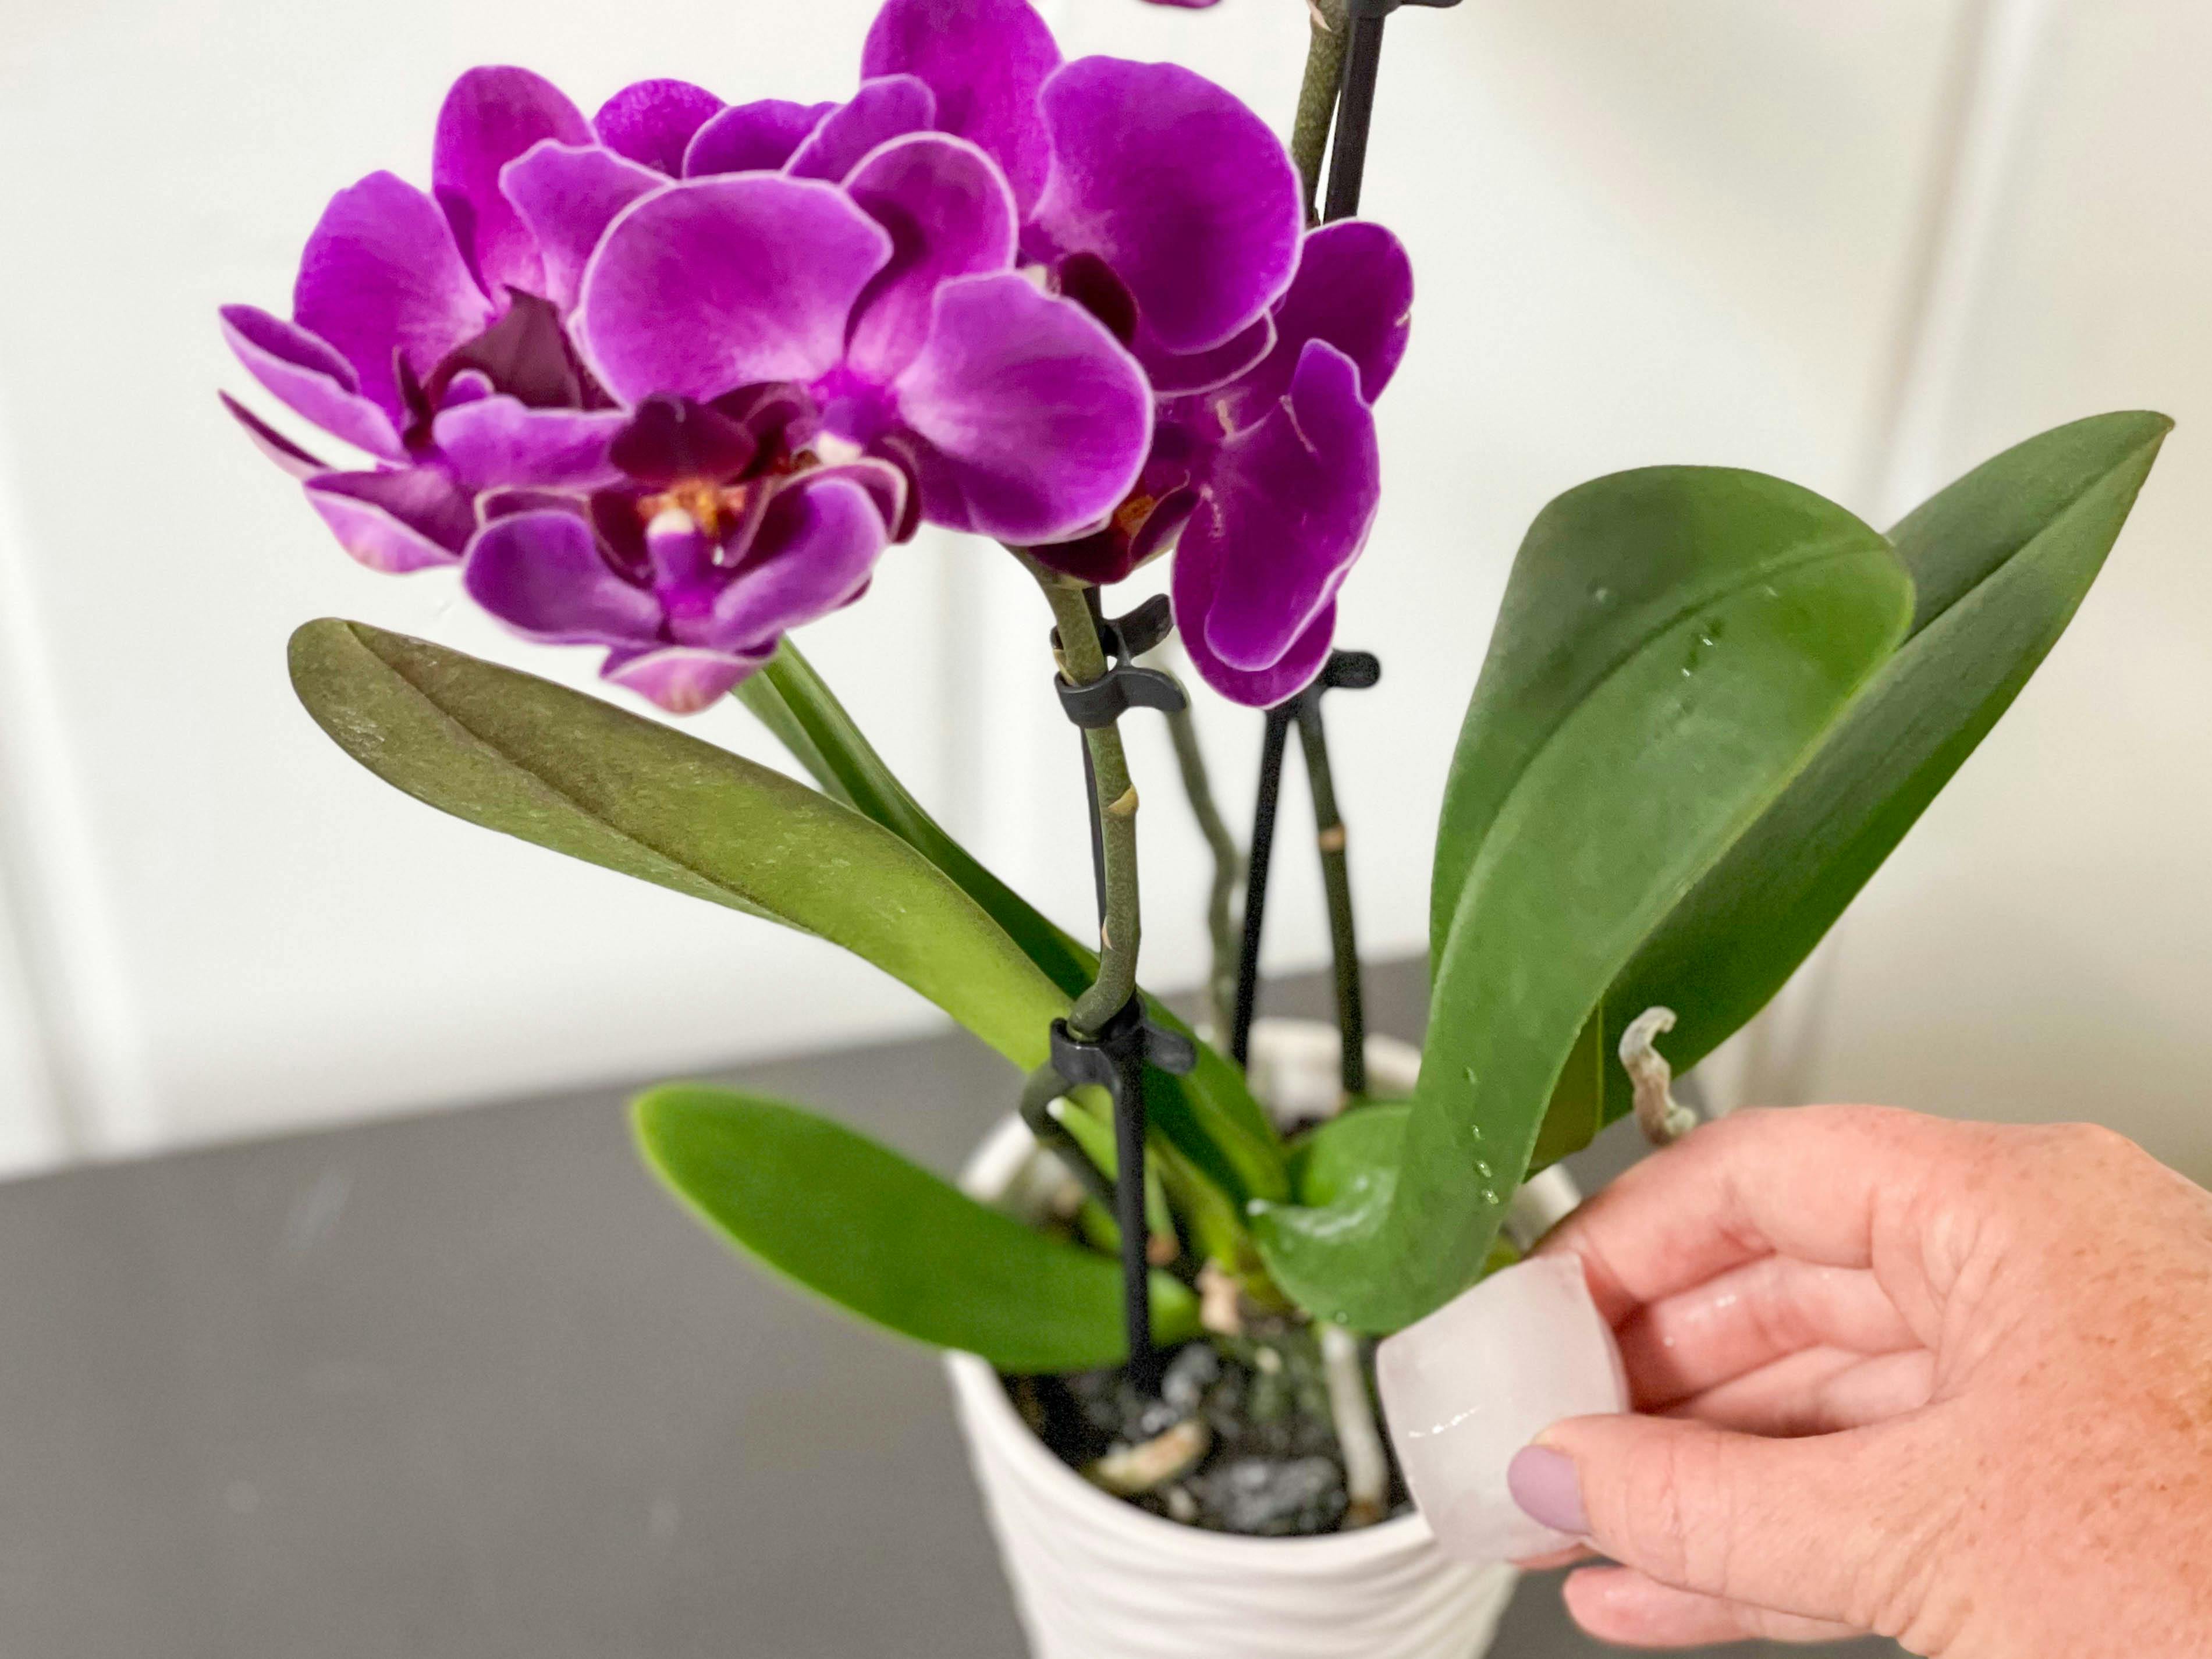 putting an ice cube into the base of an orchid plant